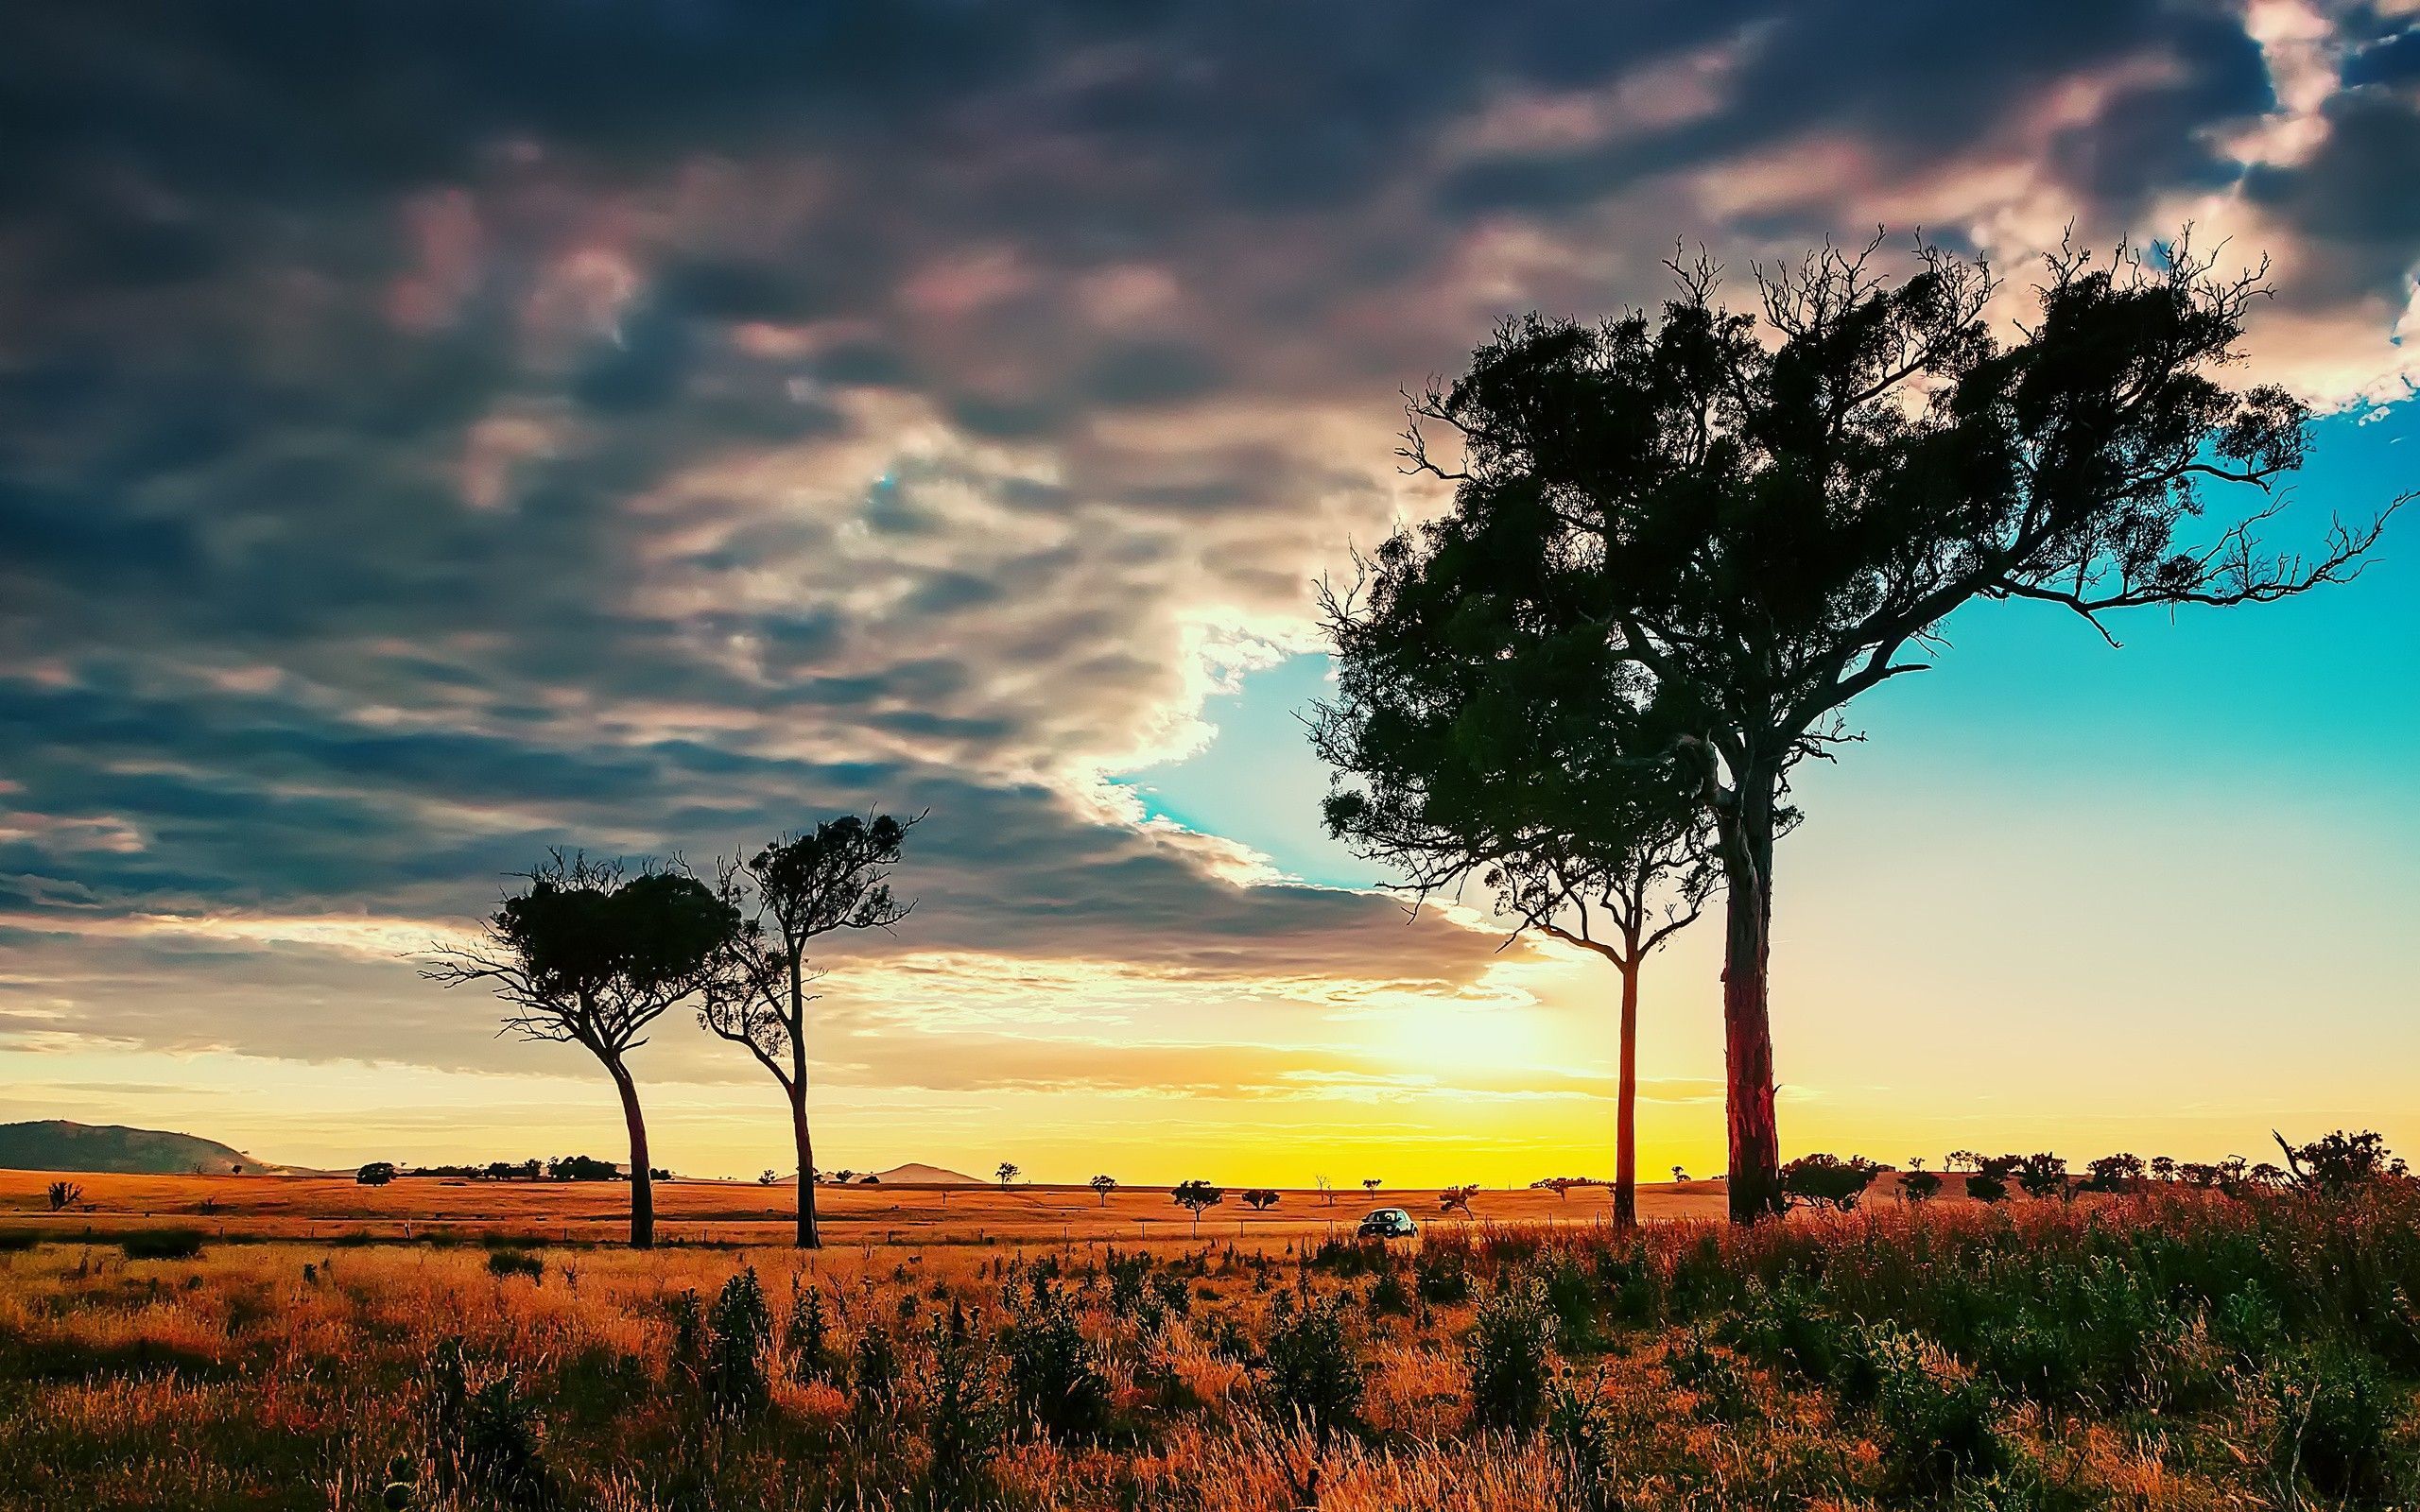 Trees in the African savanna wallpapers and images - wallpapers